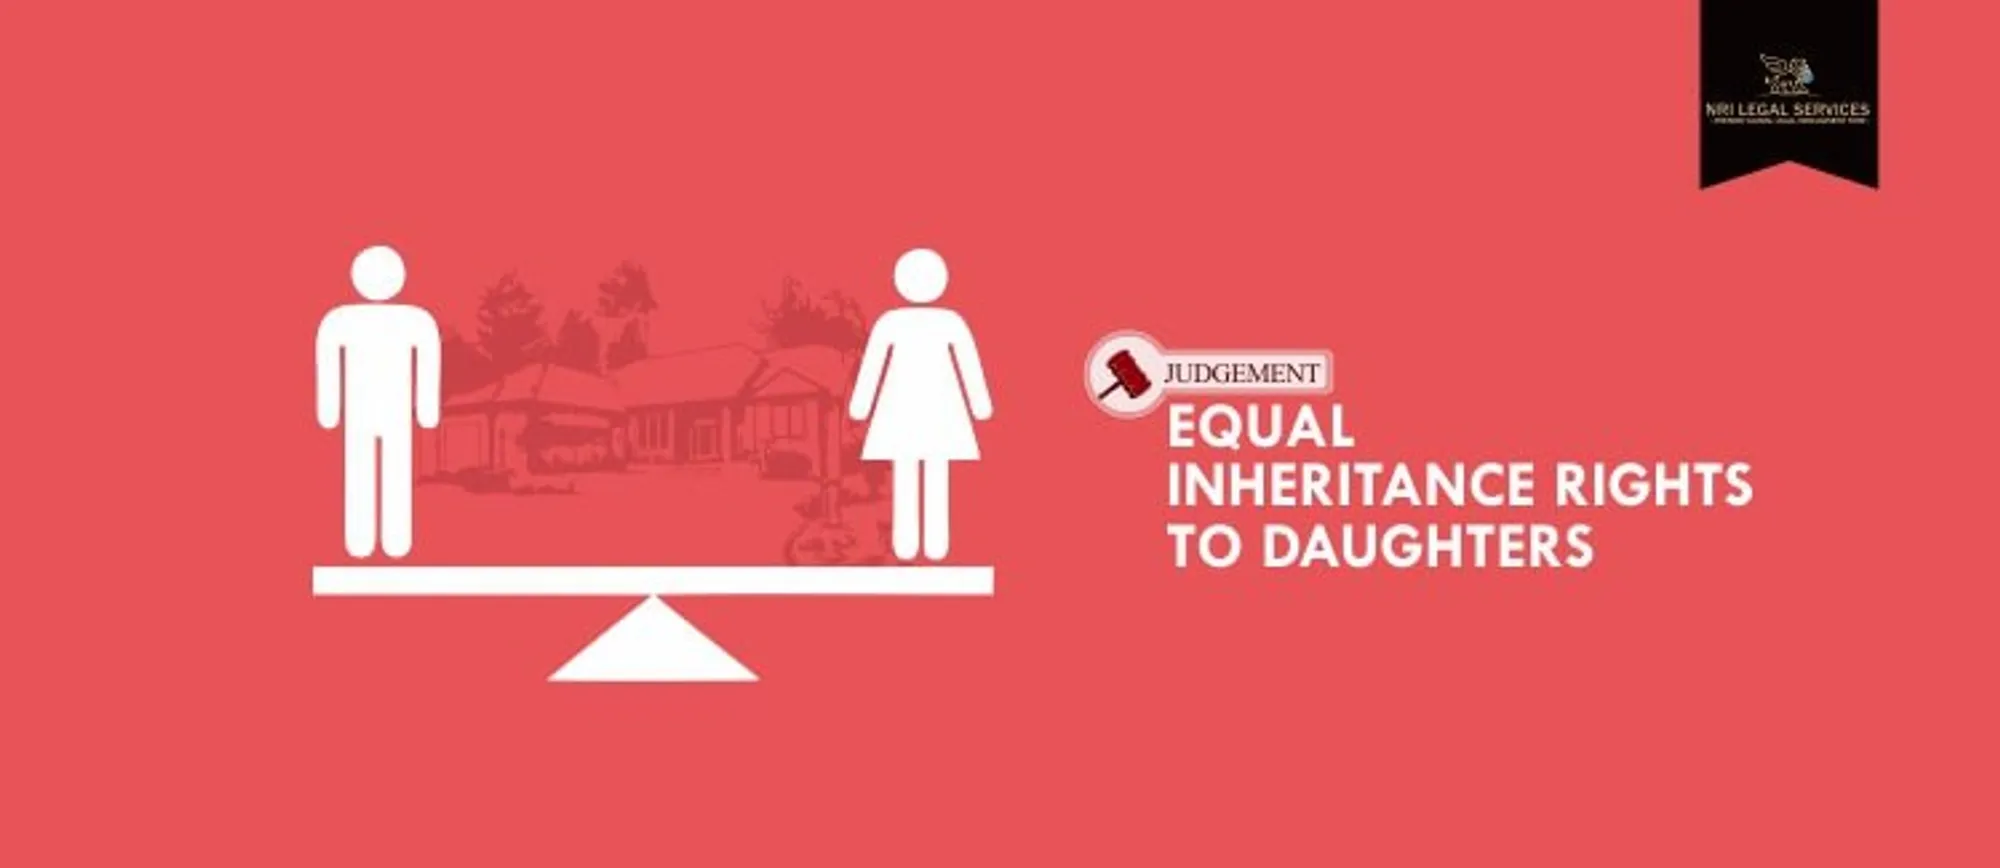 Equal inheritance rights to daughters